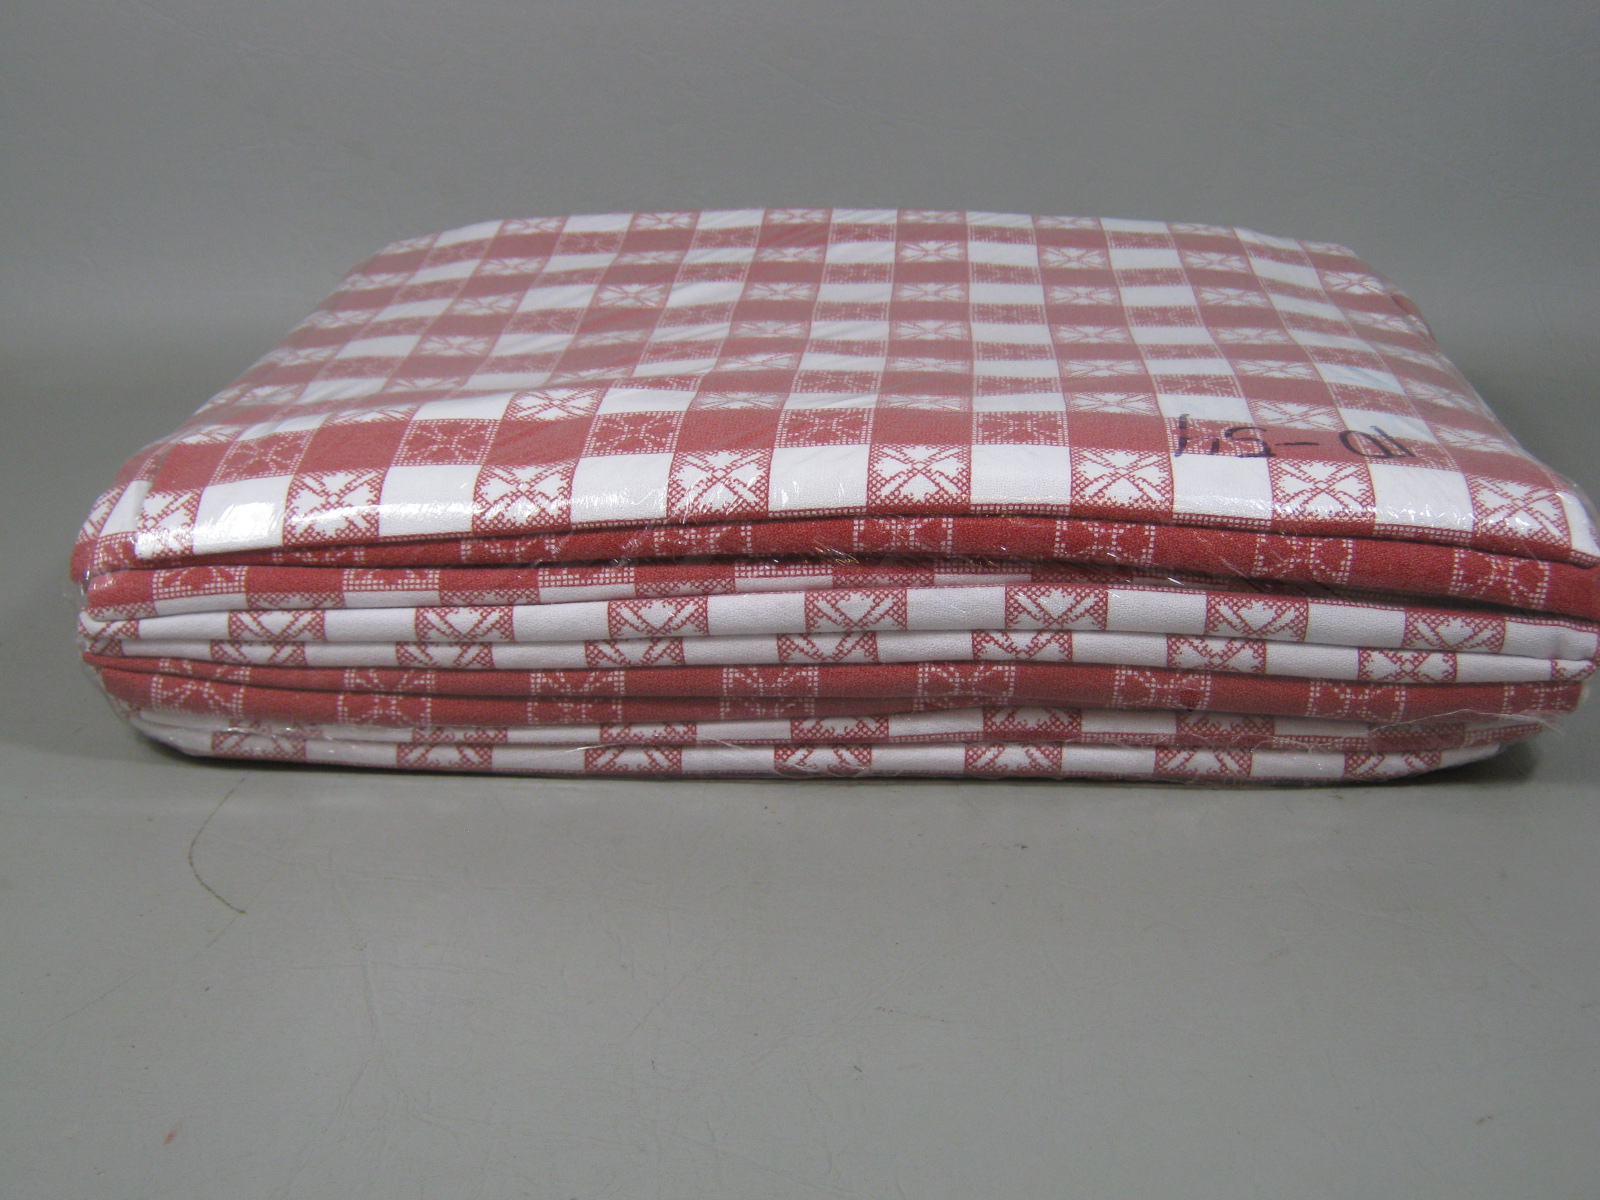 10 Square 54" Tablecloths Red White Checkered Linens Picnic Catering Restaurant 2